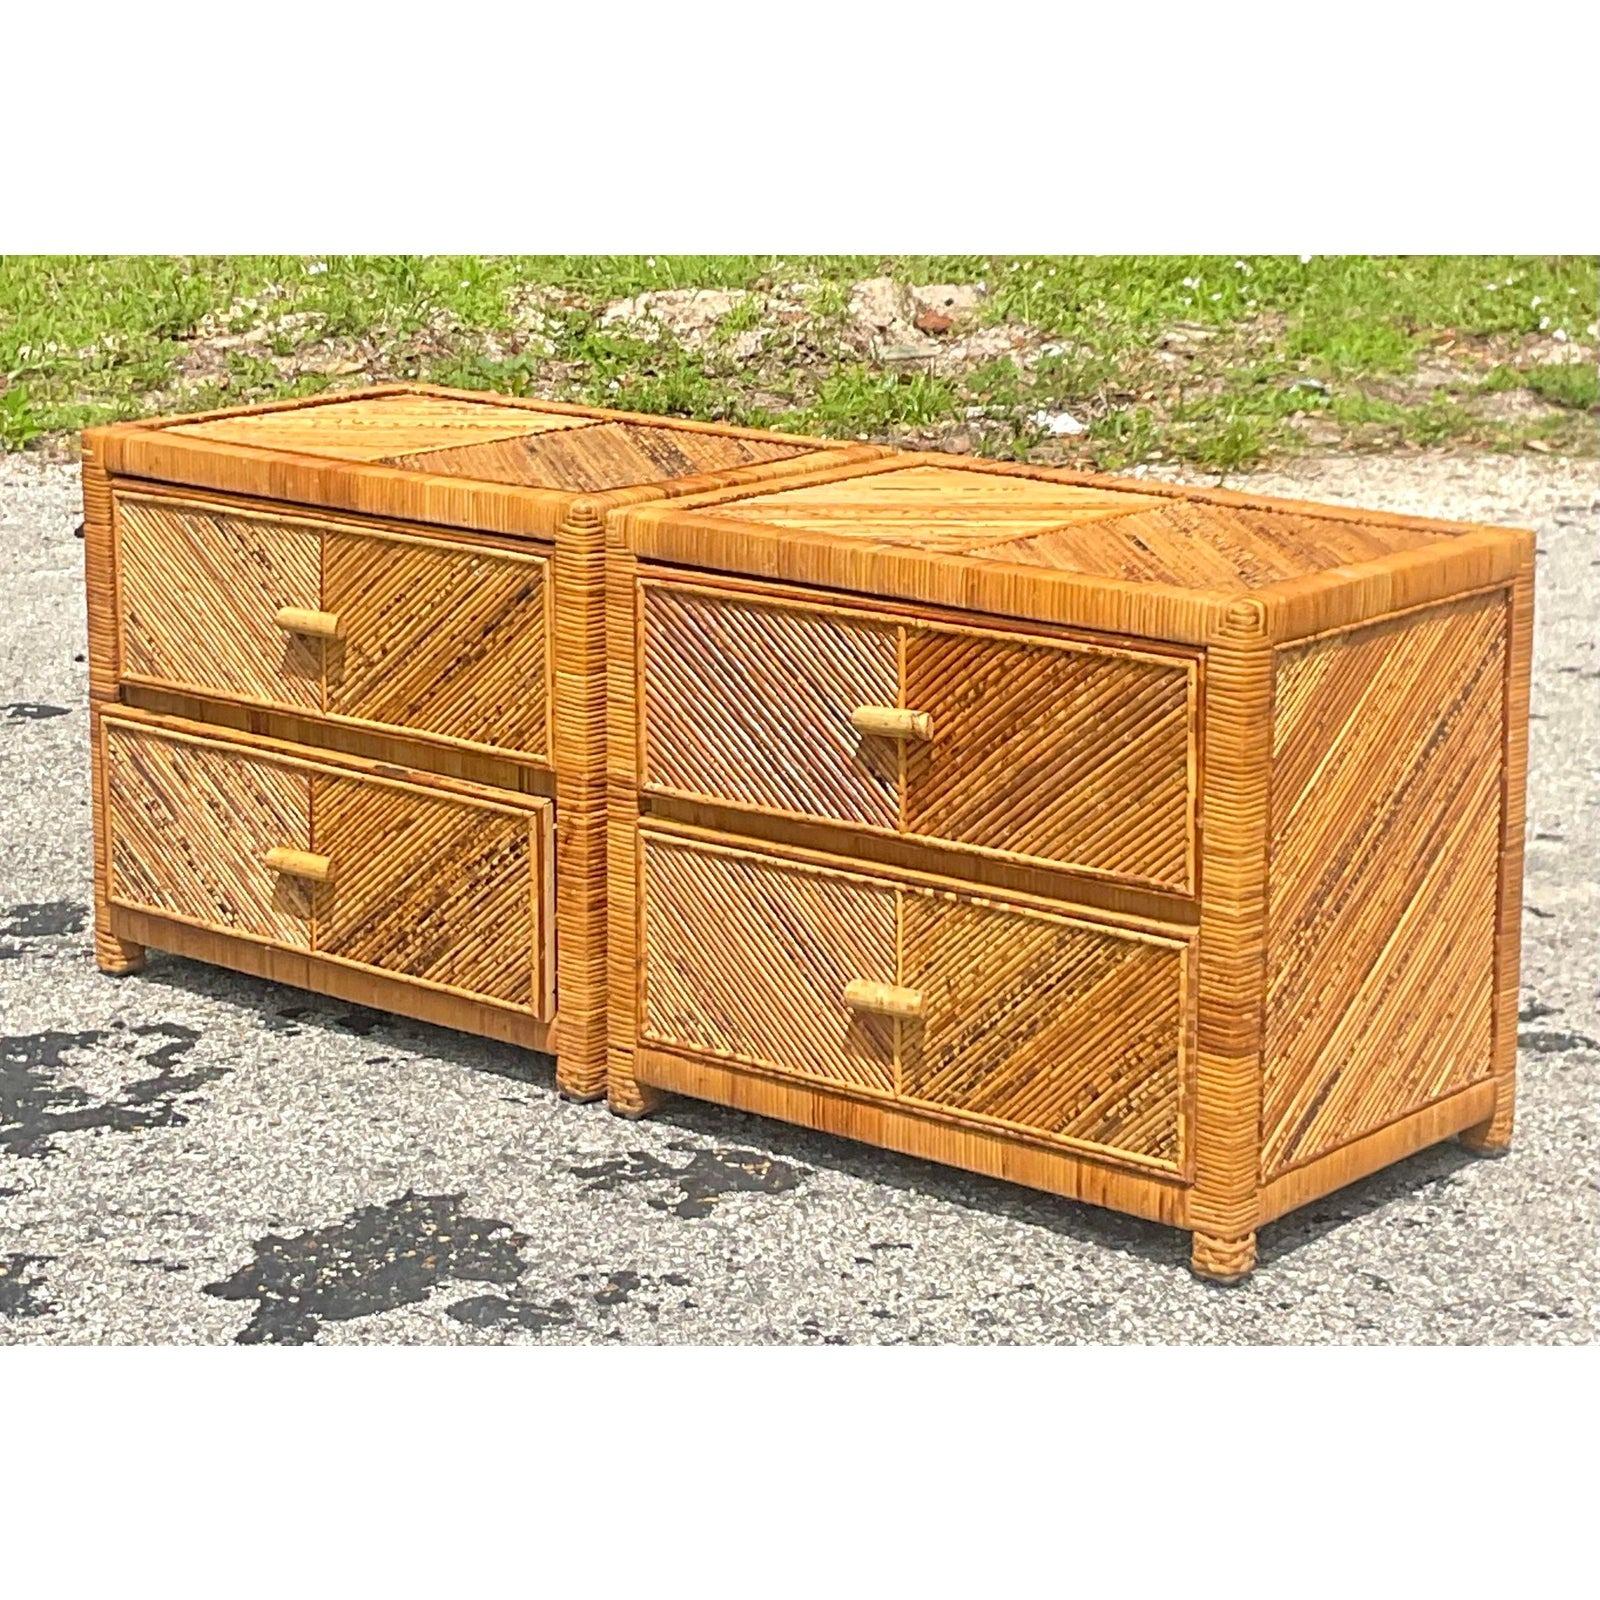 A fabulous pair of vintage Coastal nightstands. Beautiful warm pencil reed in a chic Chevron pattern. Two drawers each. Acquired from a Palm Beach estate.